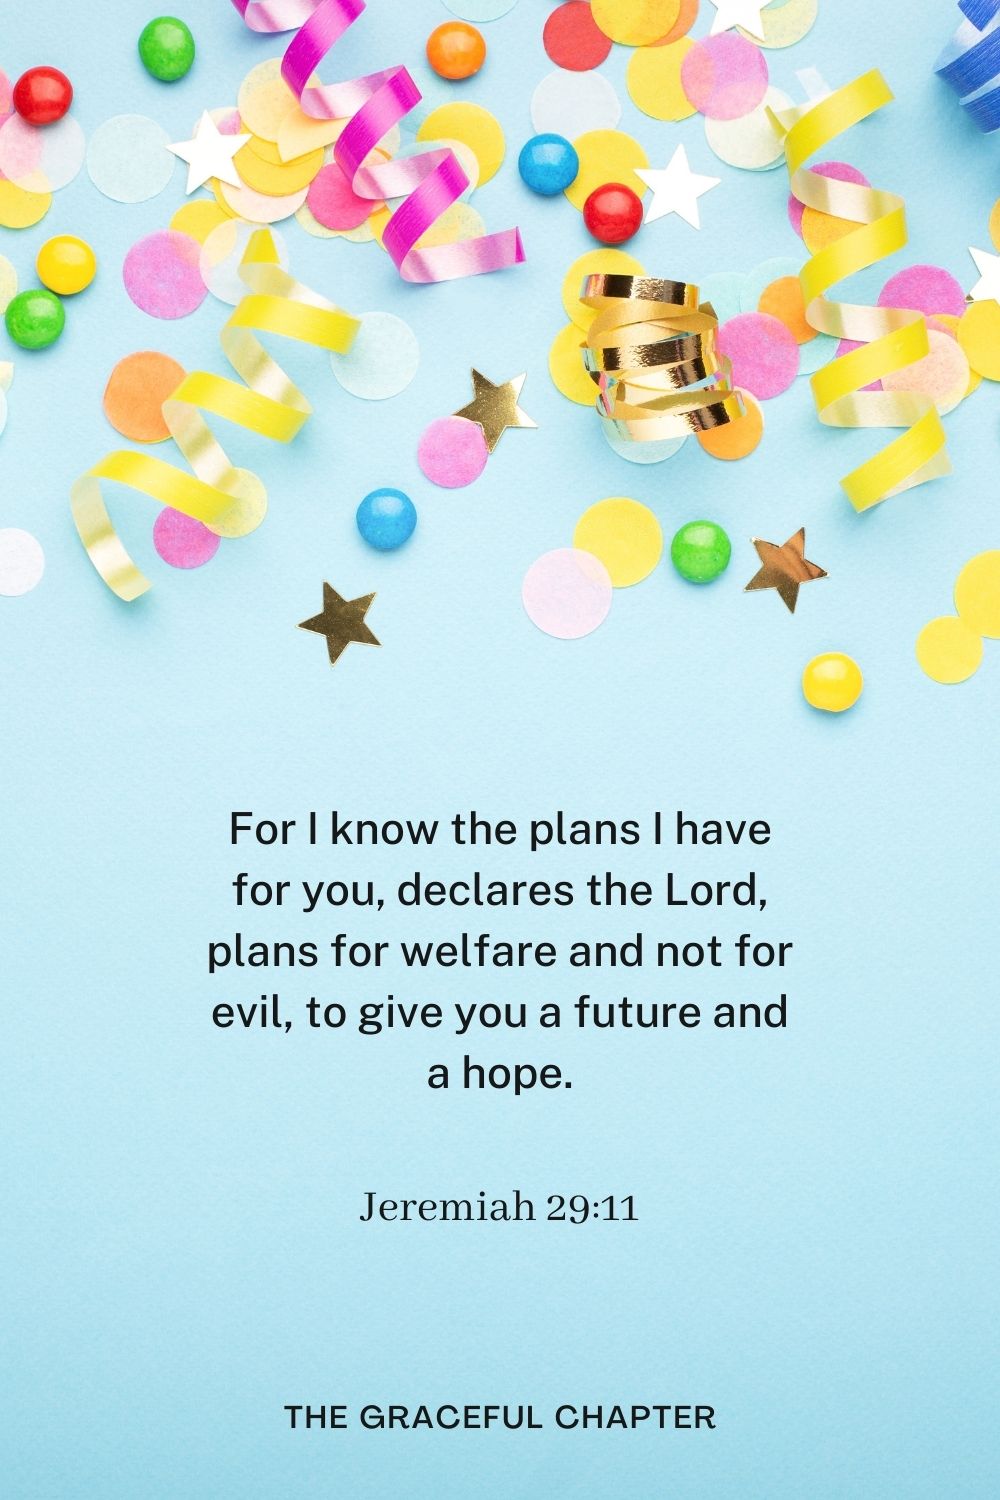 For I know the plans I have for you, declares the Lord, plans for welfare and not for evil, to give you a future and a hope. Jeremiah 29:11